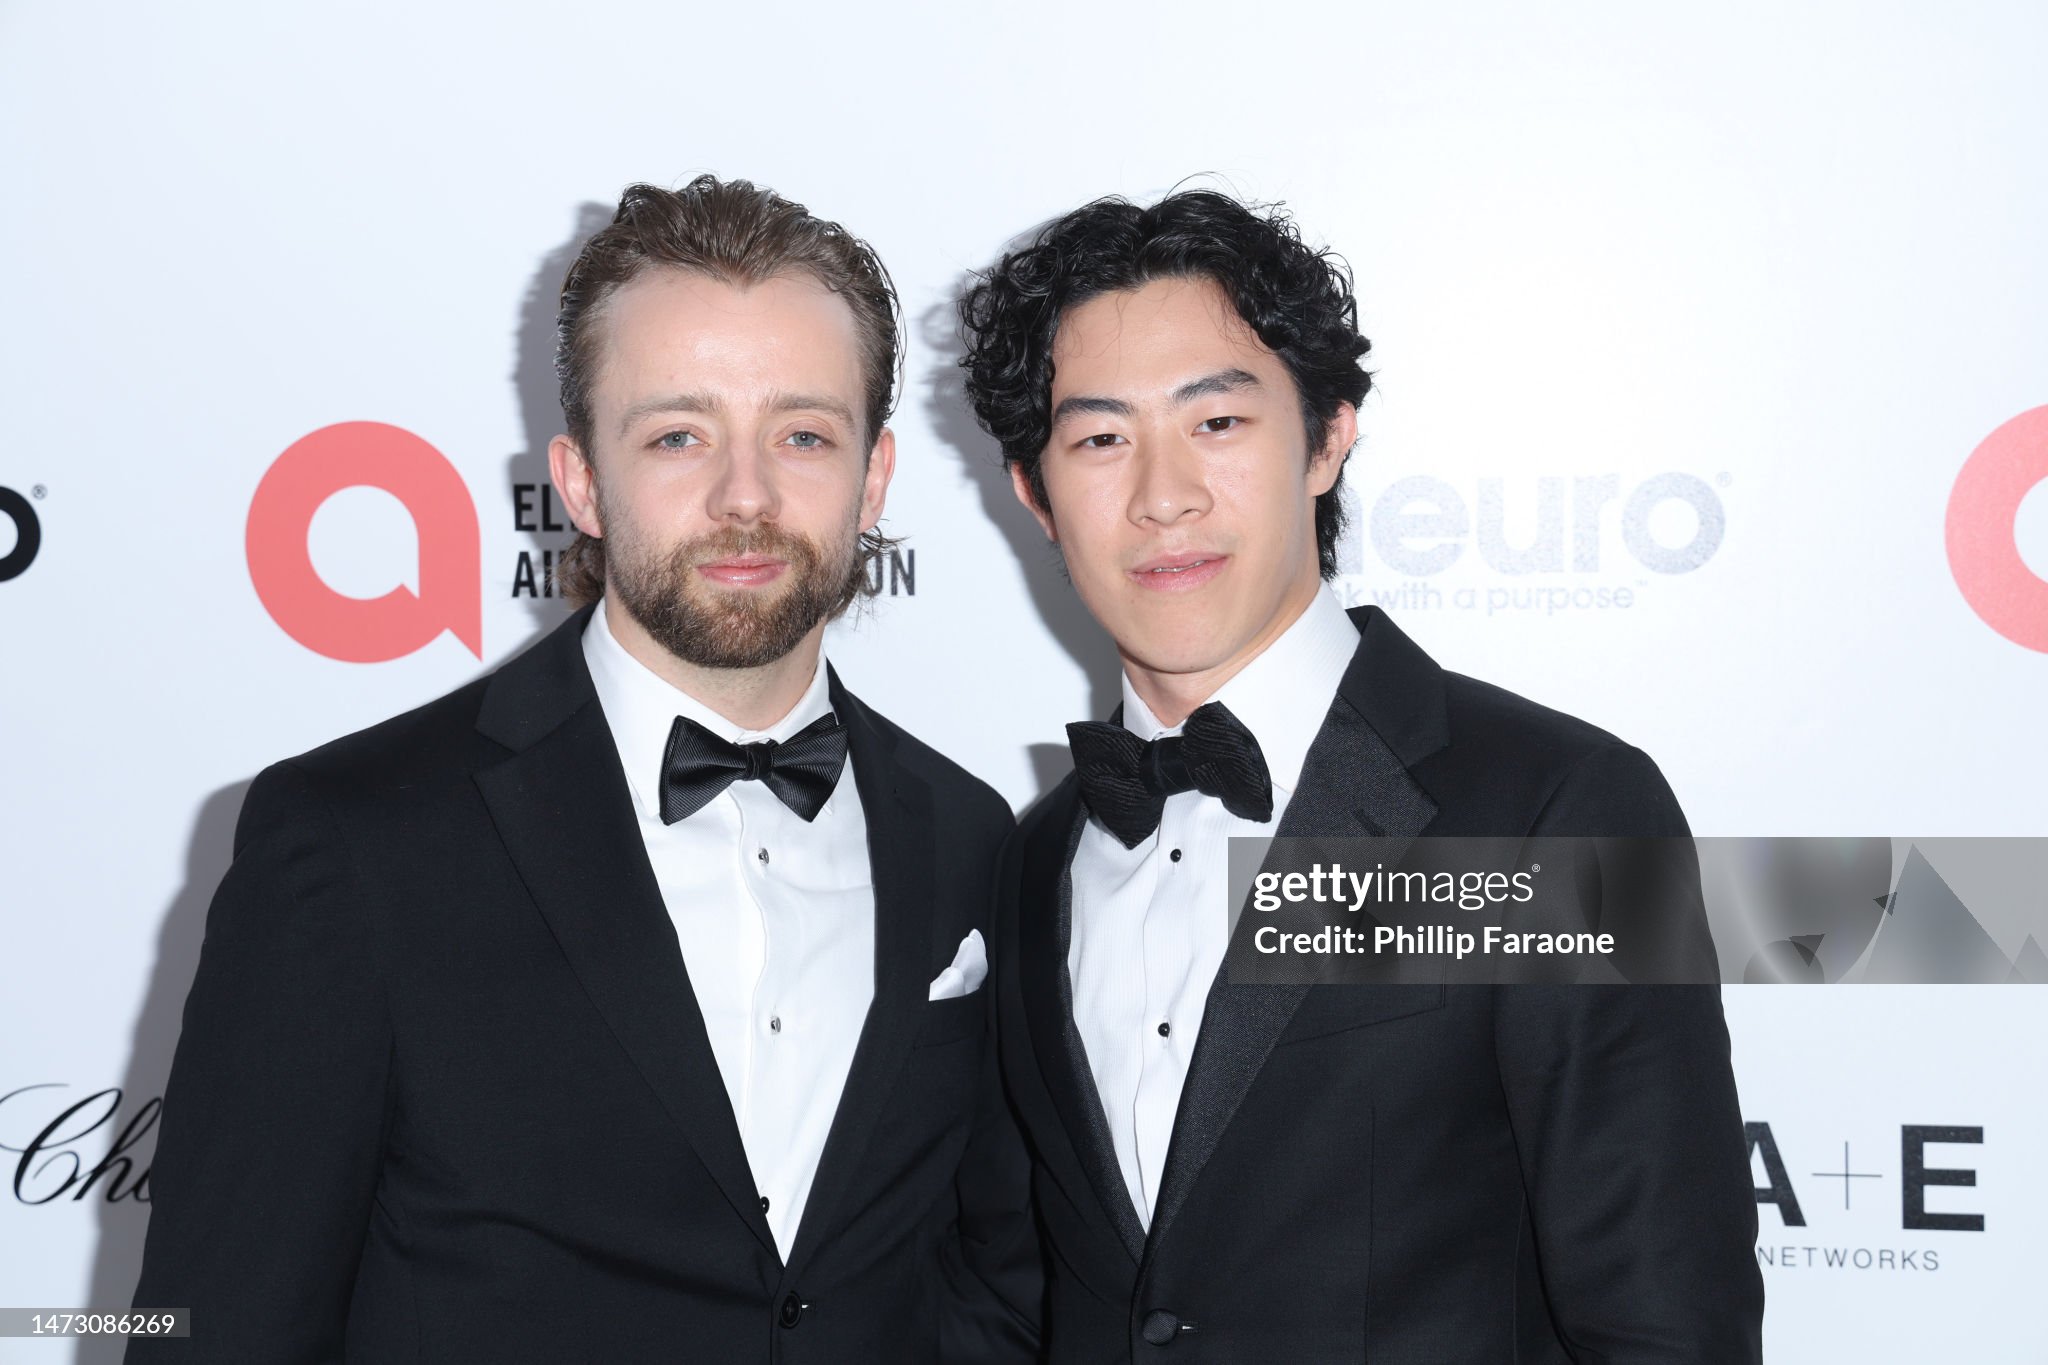 Elton John AIDS Foundation's 31st Annual Academy Awards Viewing Party - Arrivals